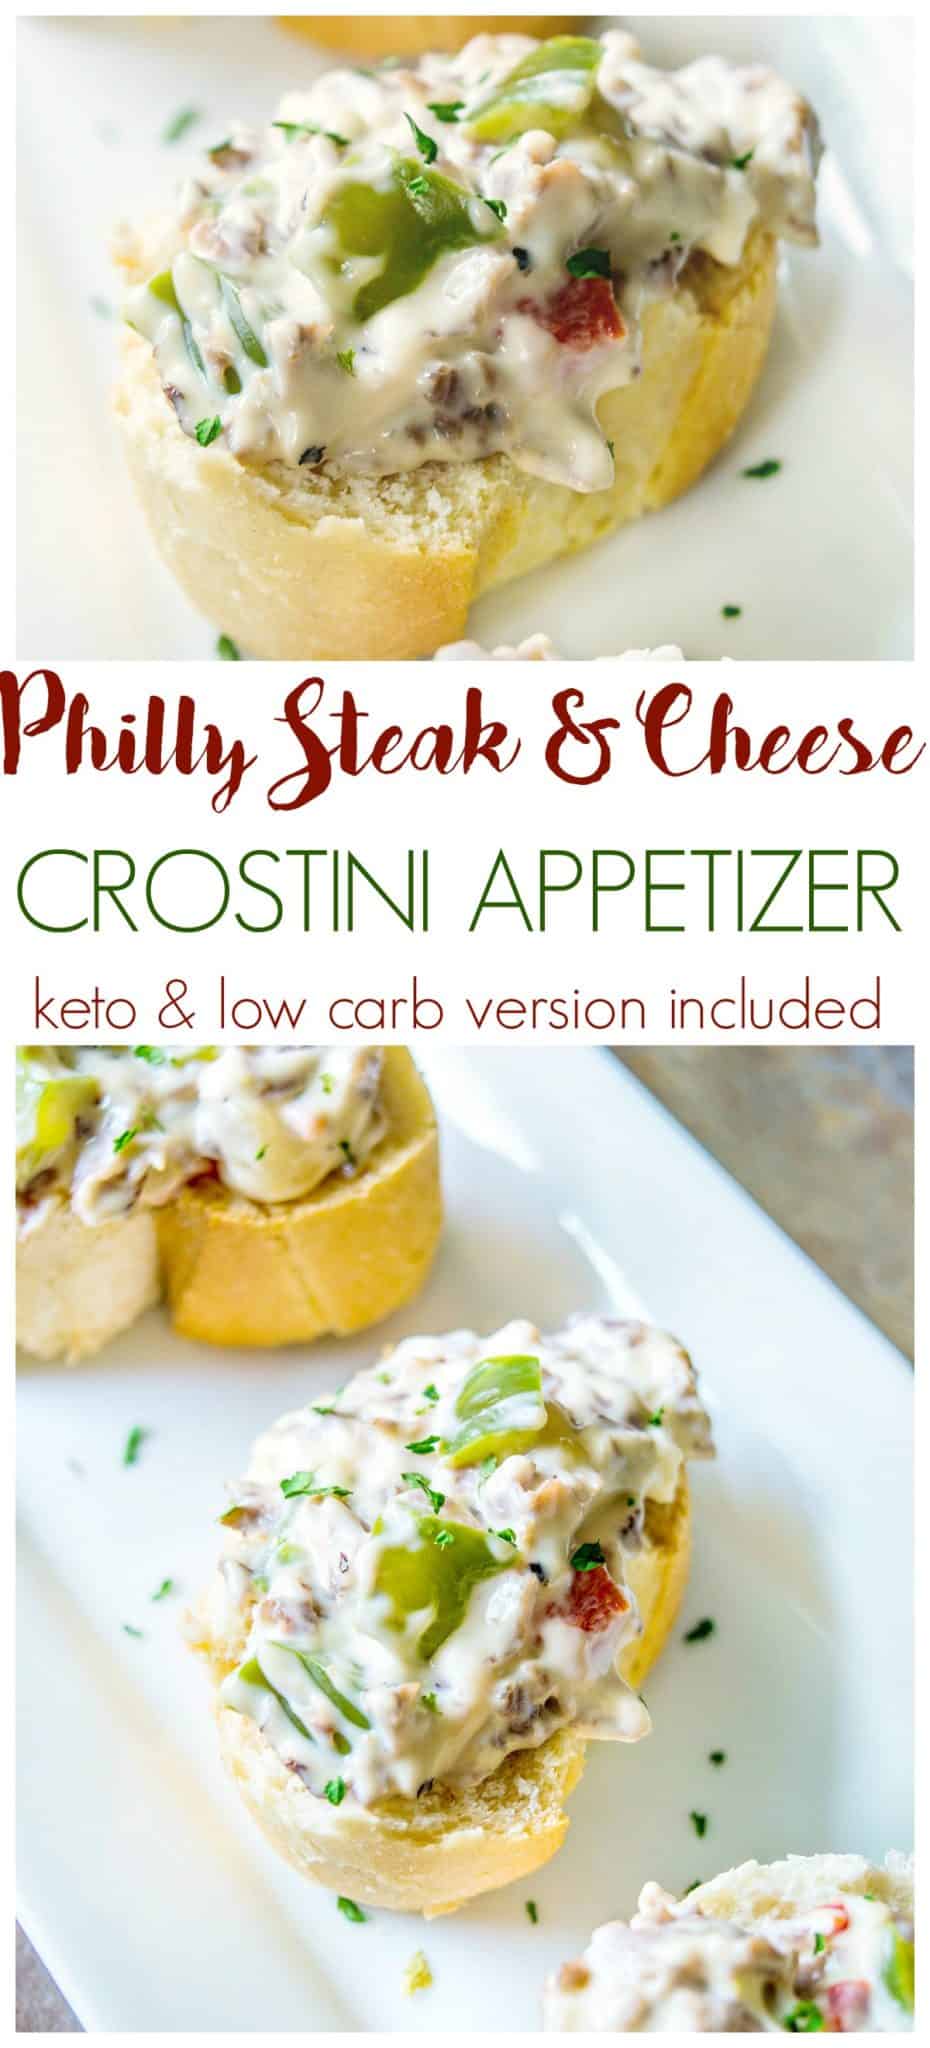 philly steak and cheese crostini